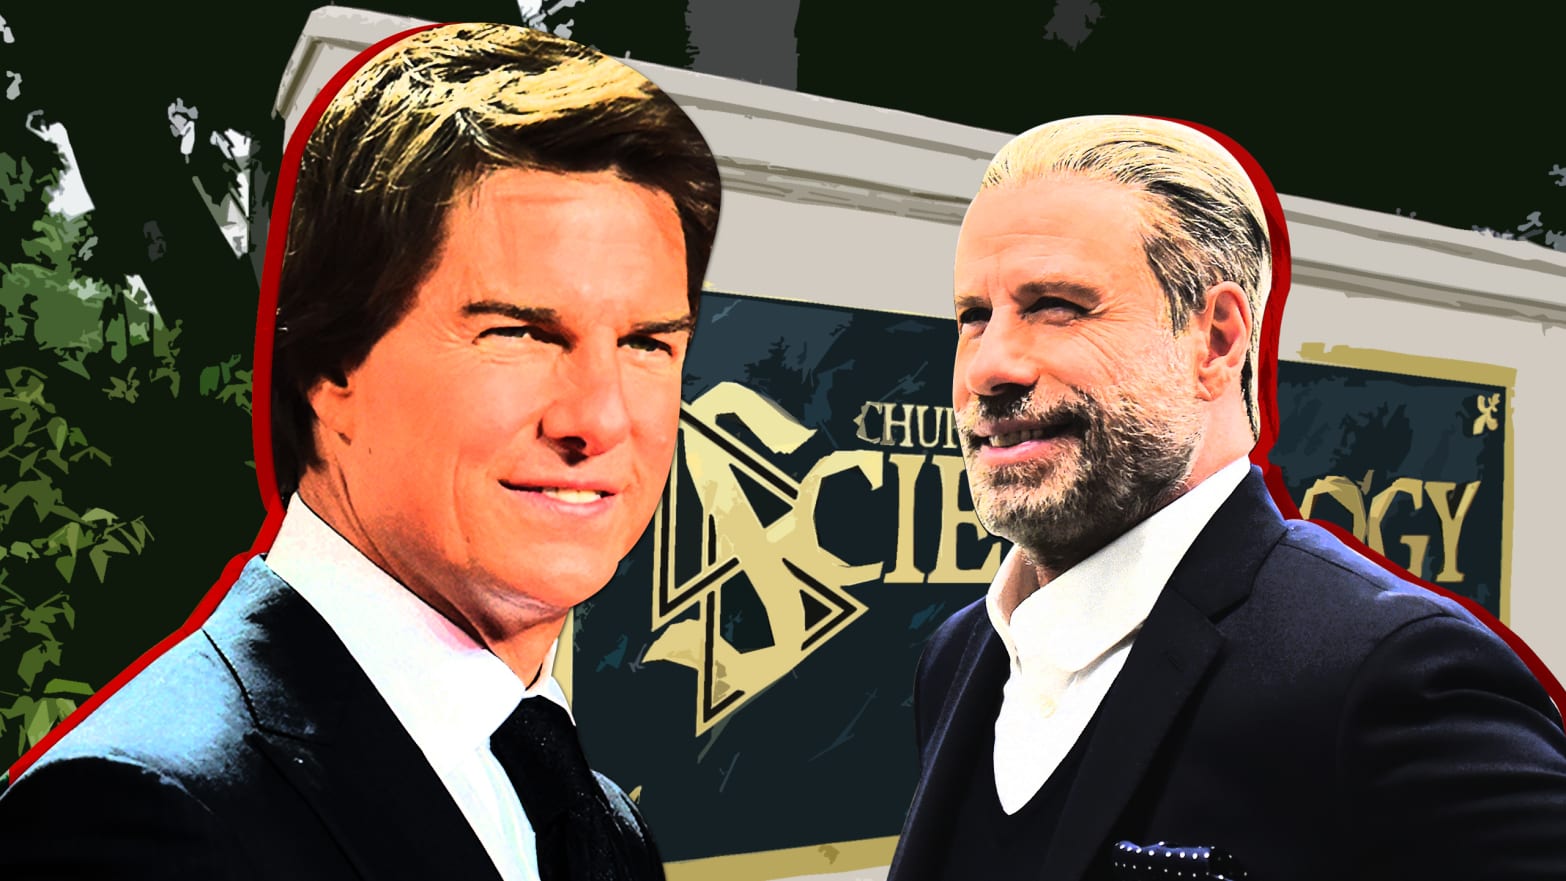 Inside Tom Cruise and John Travolta's Scientology Feud